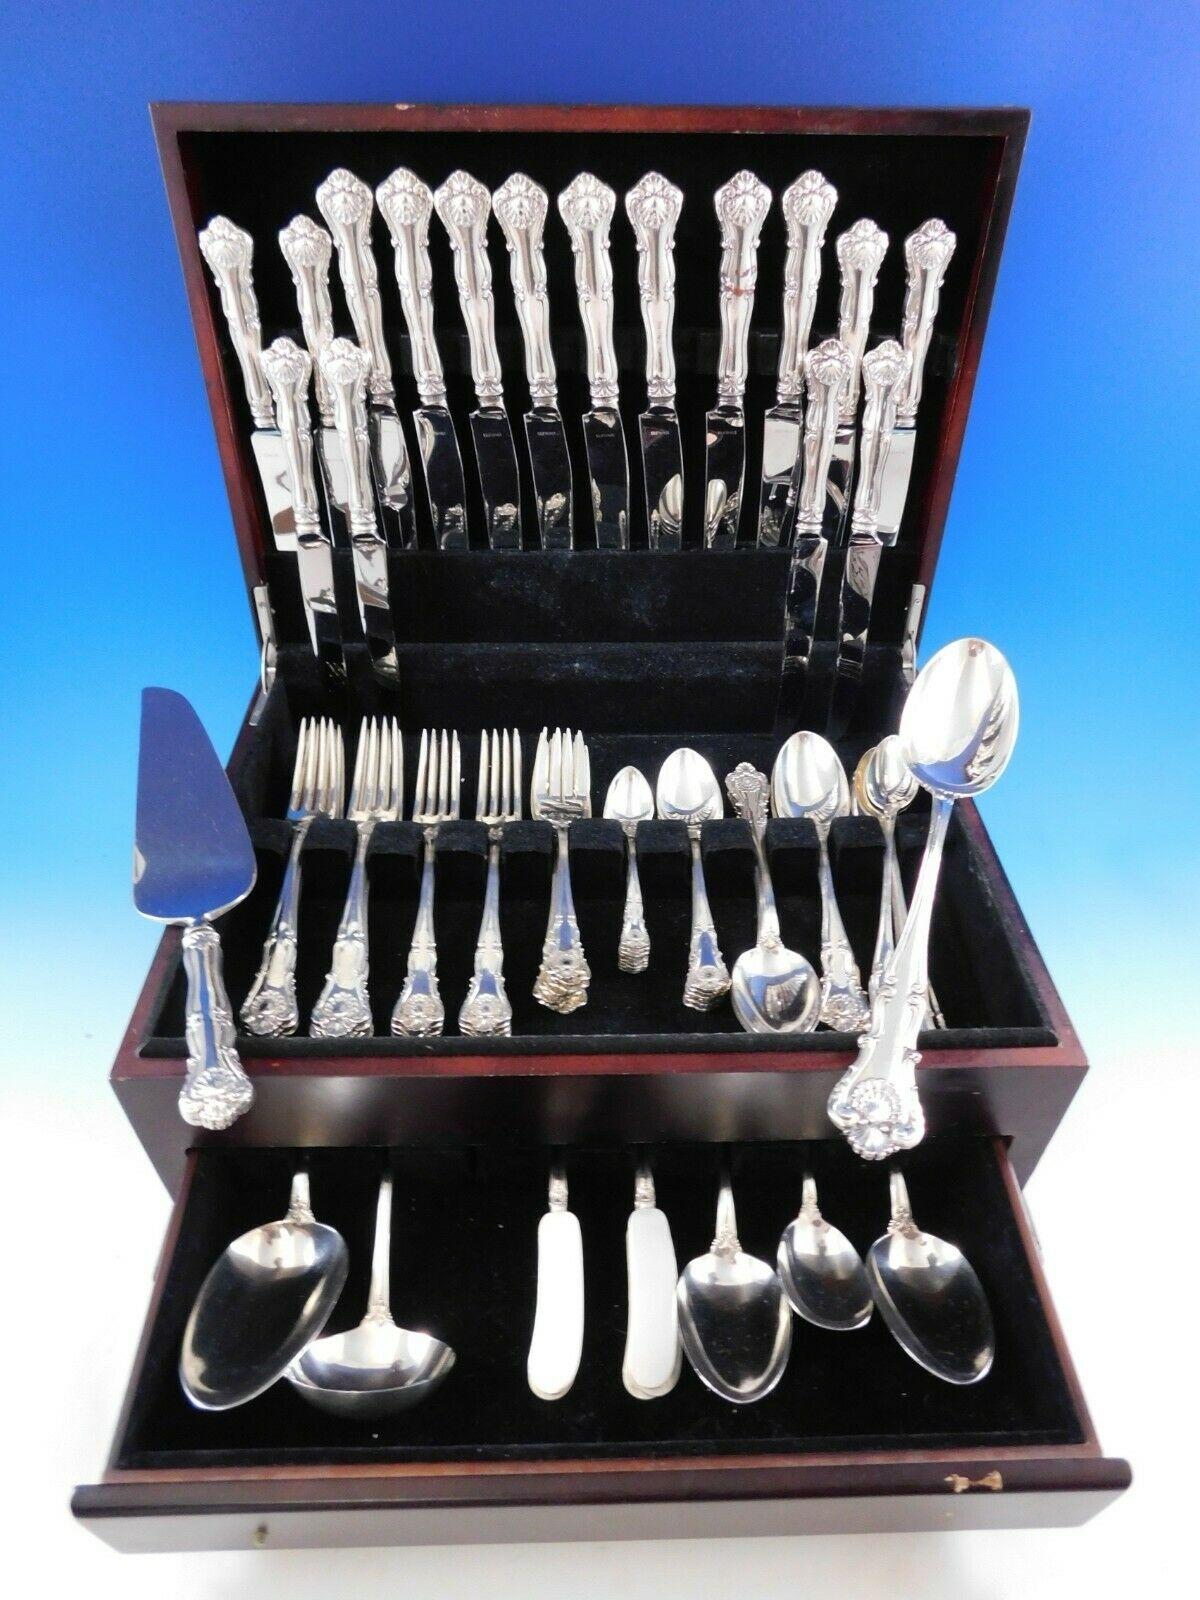 New Queens by Durgin sterling silver dinner flatware set, 87 pieces. This timeless, Classic, shell-motif pattern was introduced in the year 1900. This set includes:

8 dinner size knives, 9 1/2